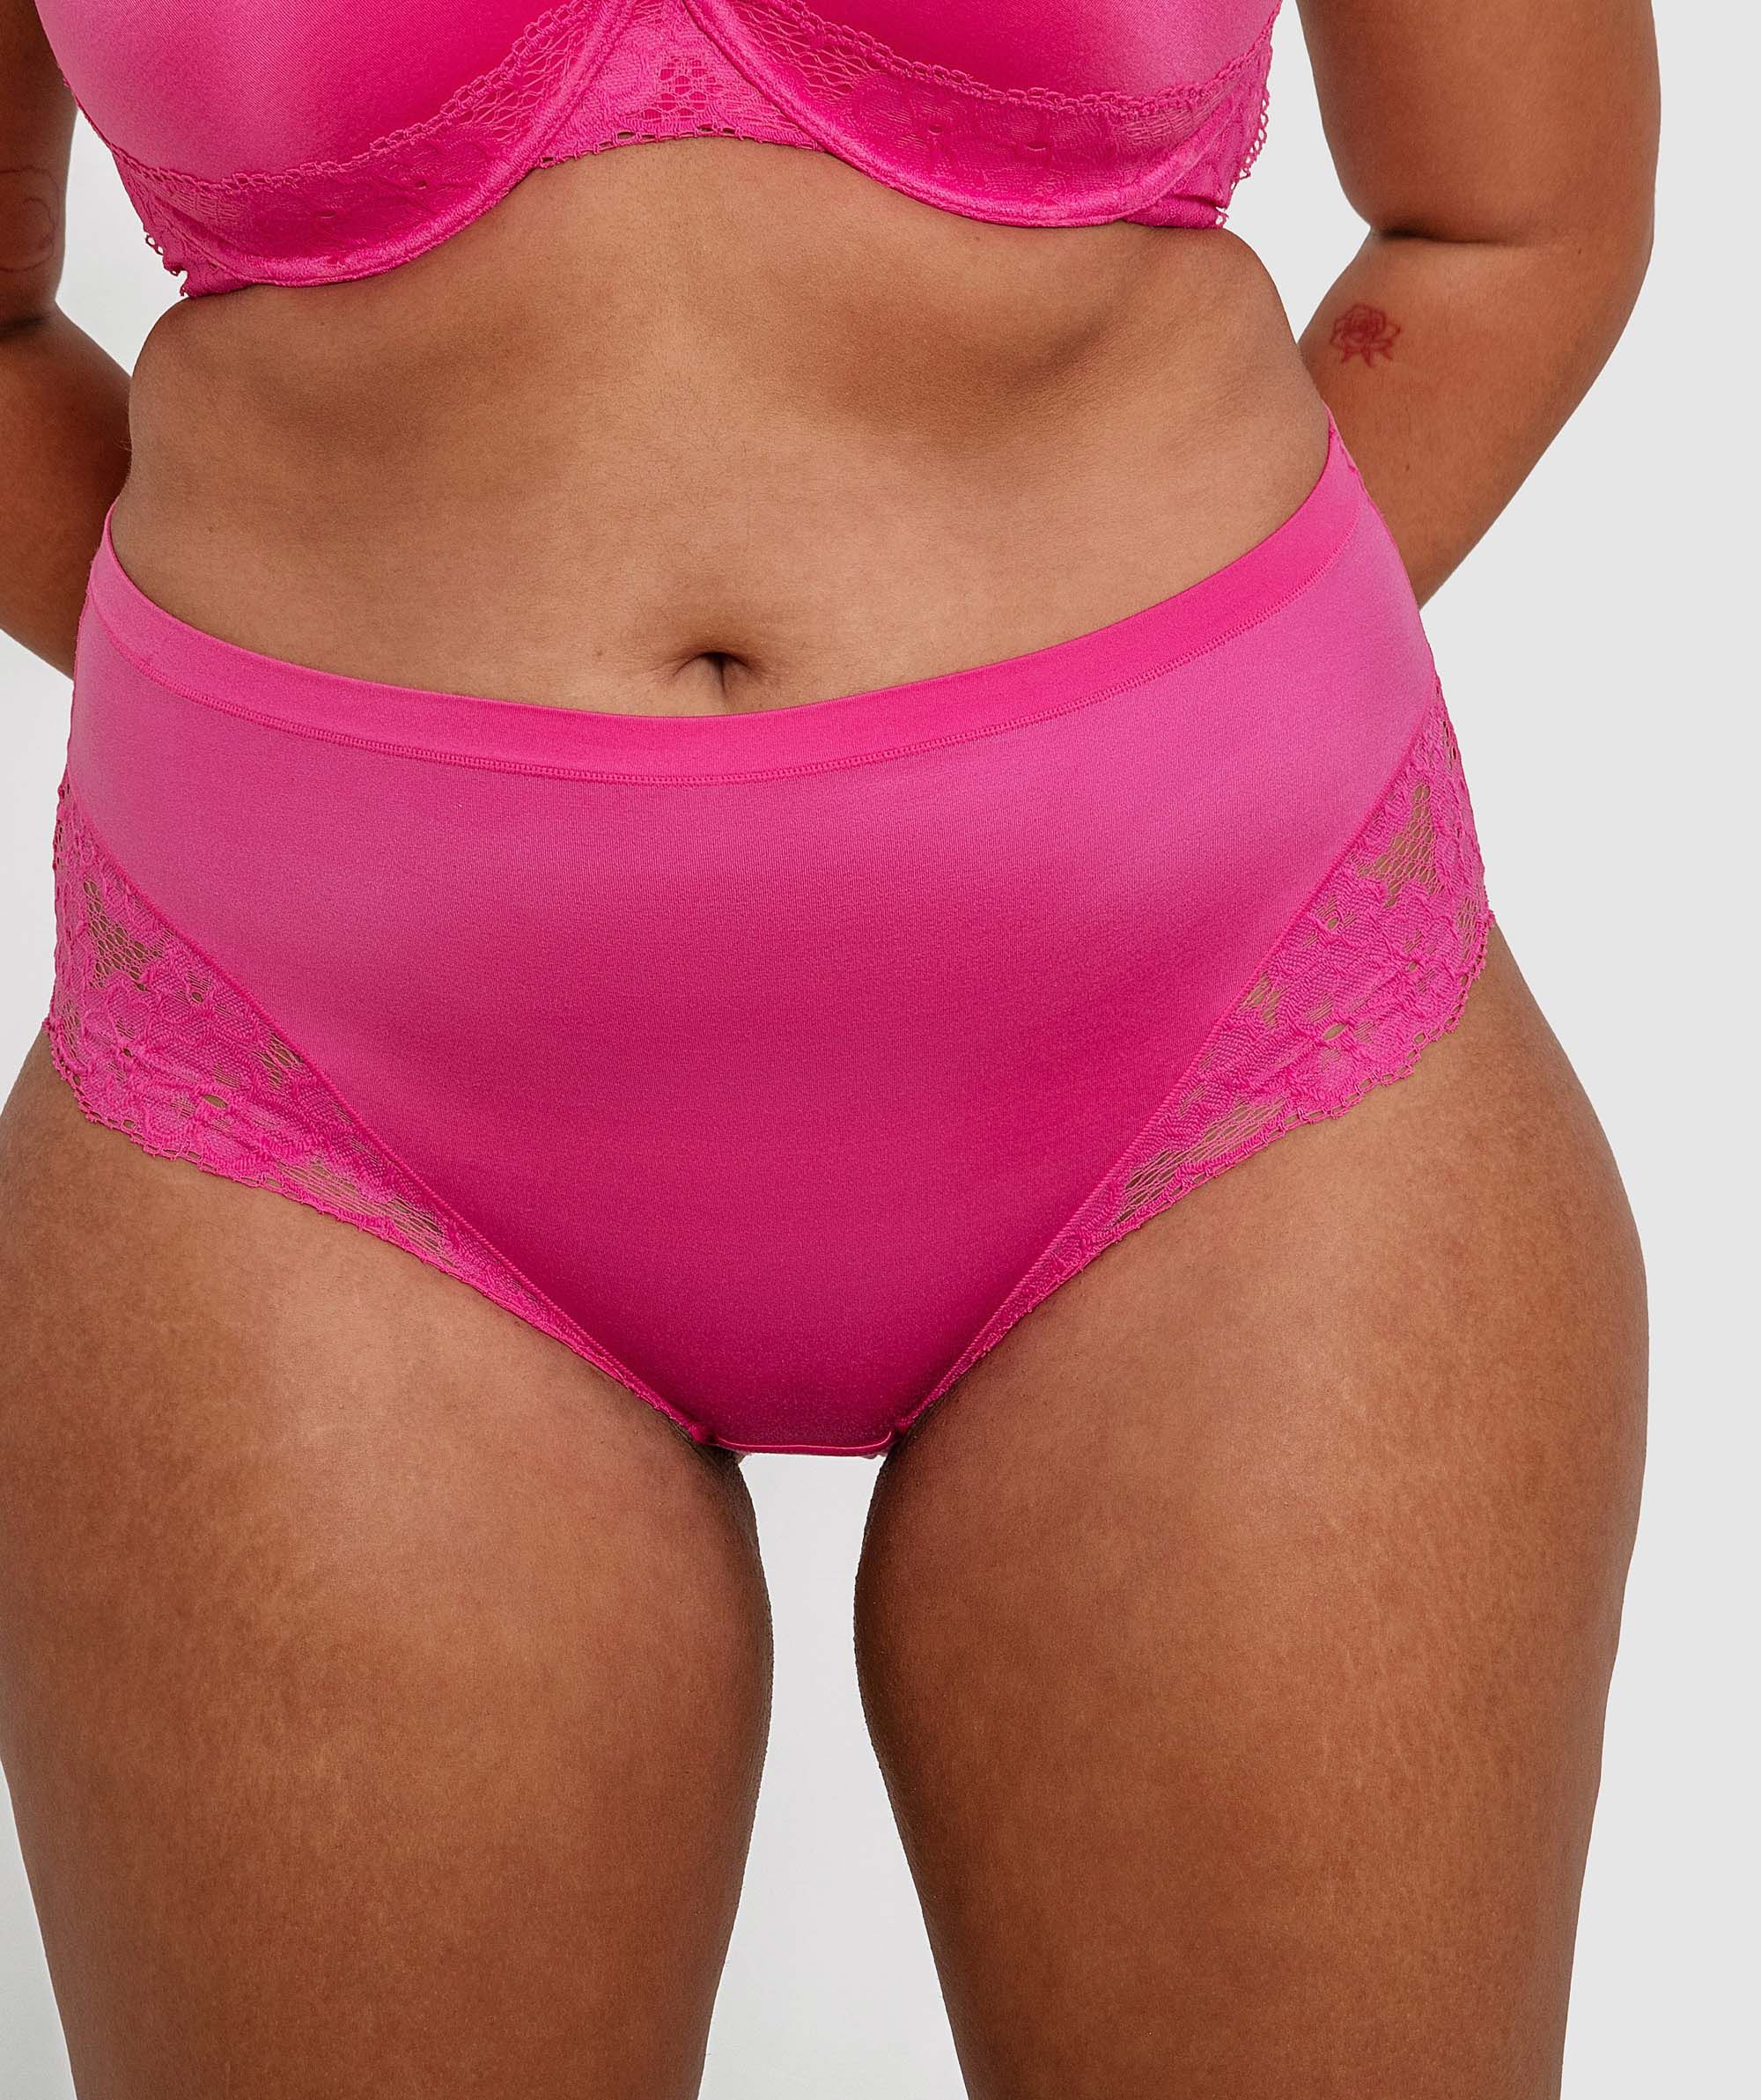 Bras N Things Planet Bliss Lace Full Brief Knicker - Fuchsia Pink